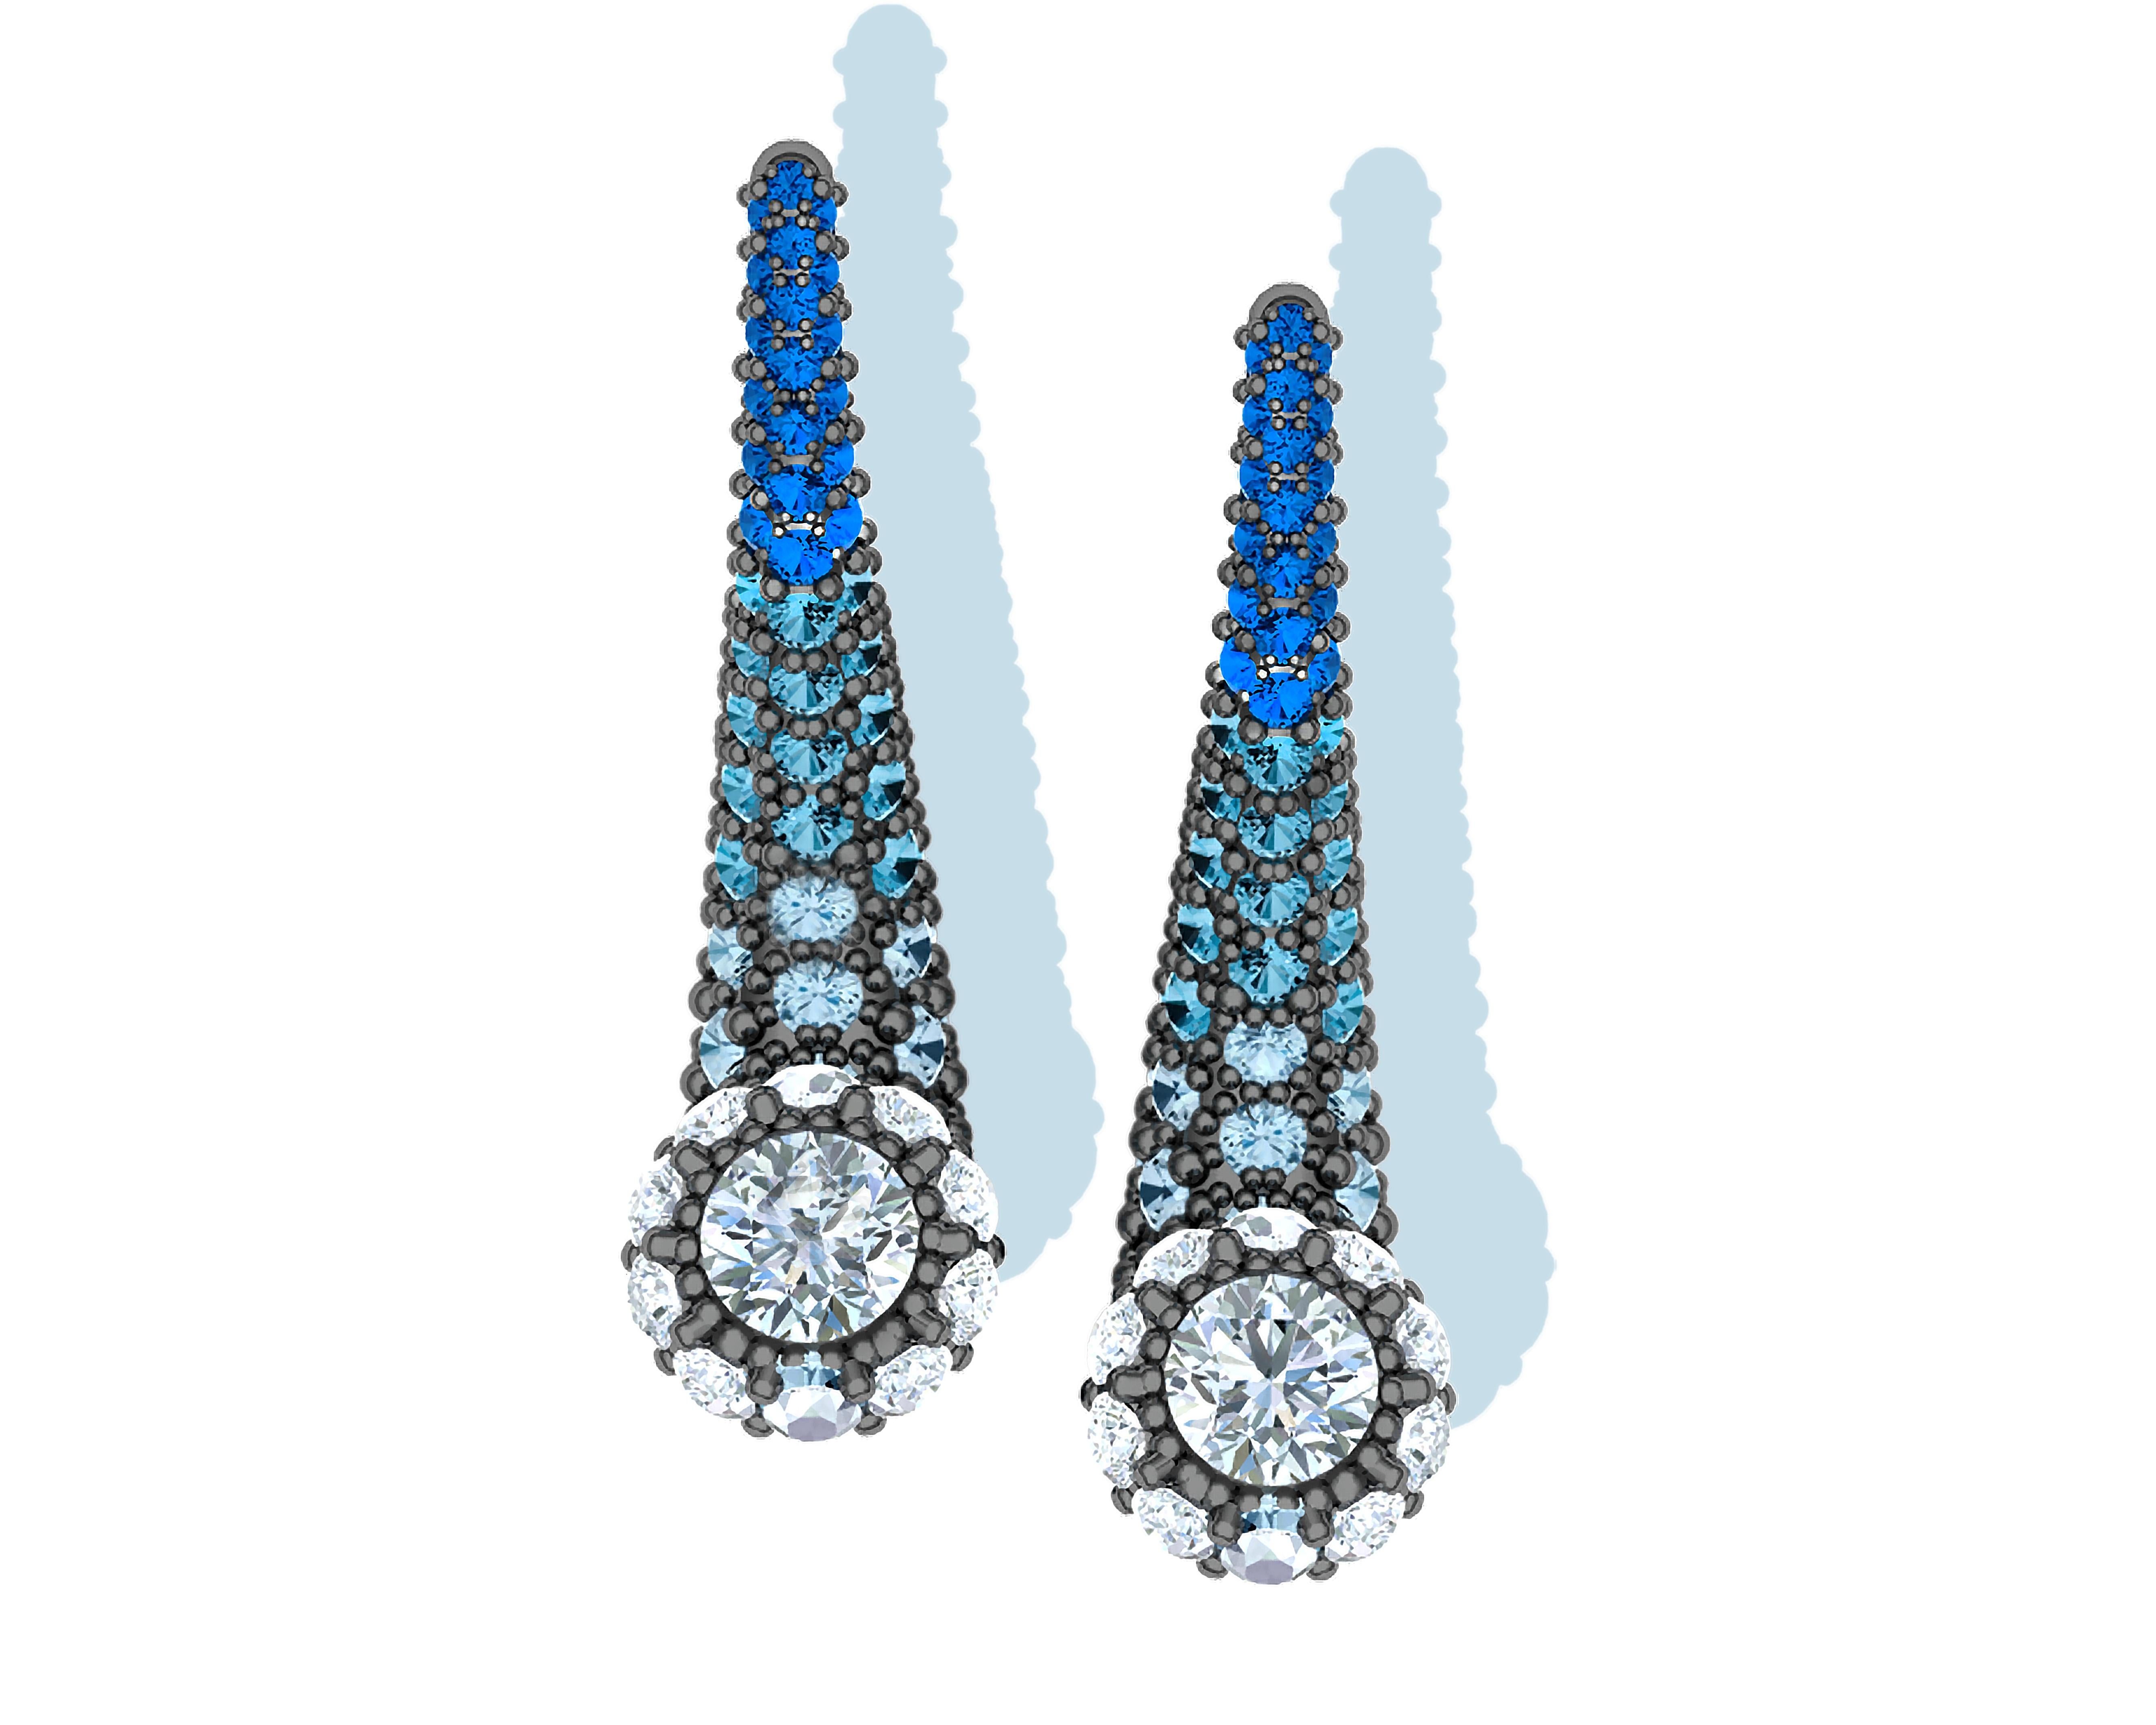 A beautiful gradual transition from white to pastel blue to rich royal blue is on display in this pair of modern yet timeless earrings.  These earrings have a .15 carat round white diamond centered at the tip of the earring where there's a rim of